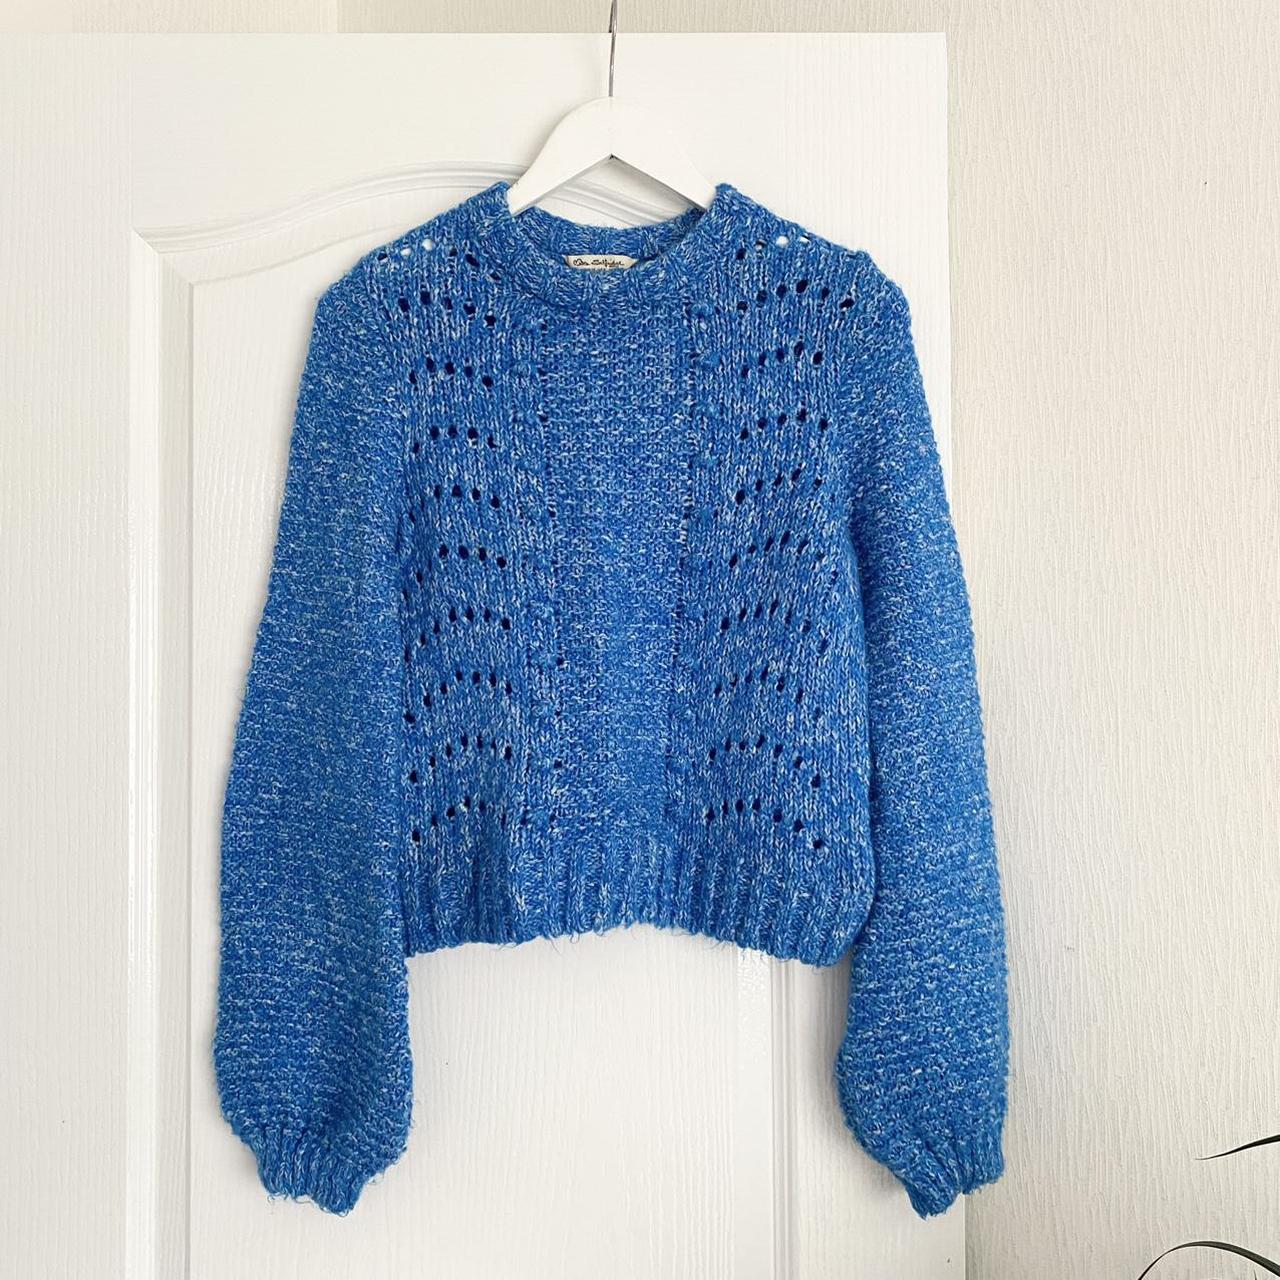 Blue crochet knitted woolly jumper with round neck... - Depop